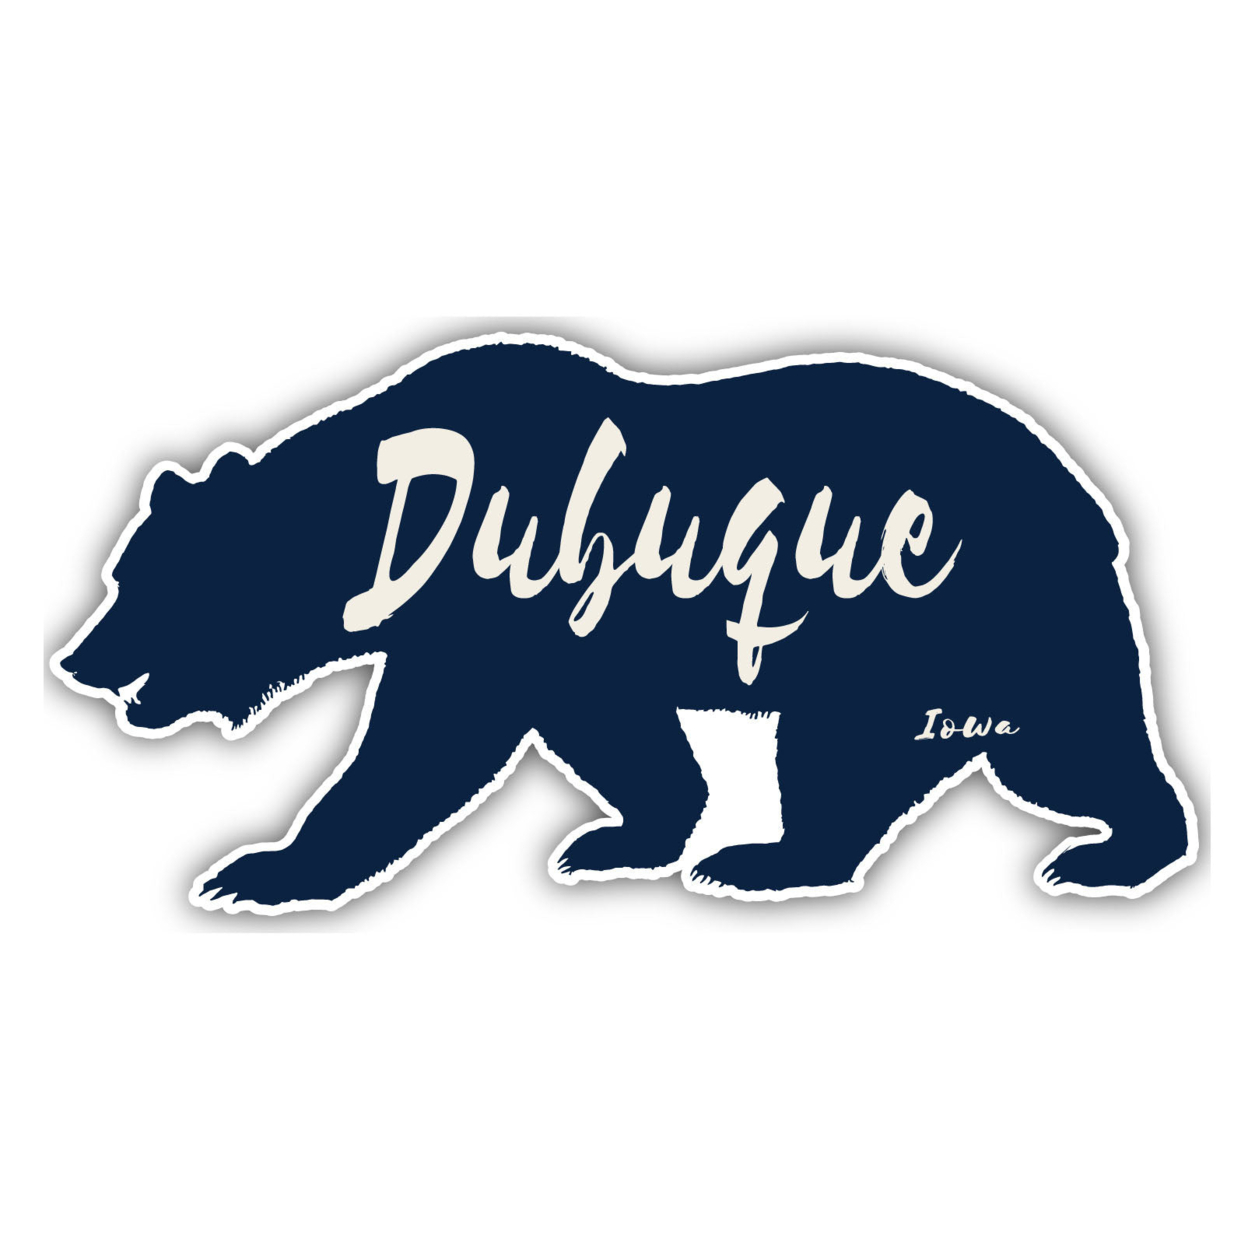 Dubuque Iowa Souvenir Decorative Stickers (Choose Theme And Size) - 4-Pack, 4-Inch, Great Outdoors